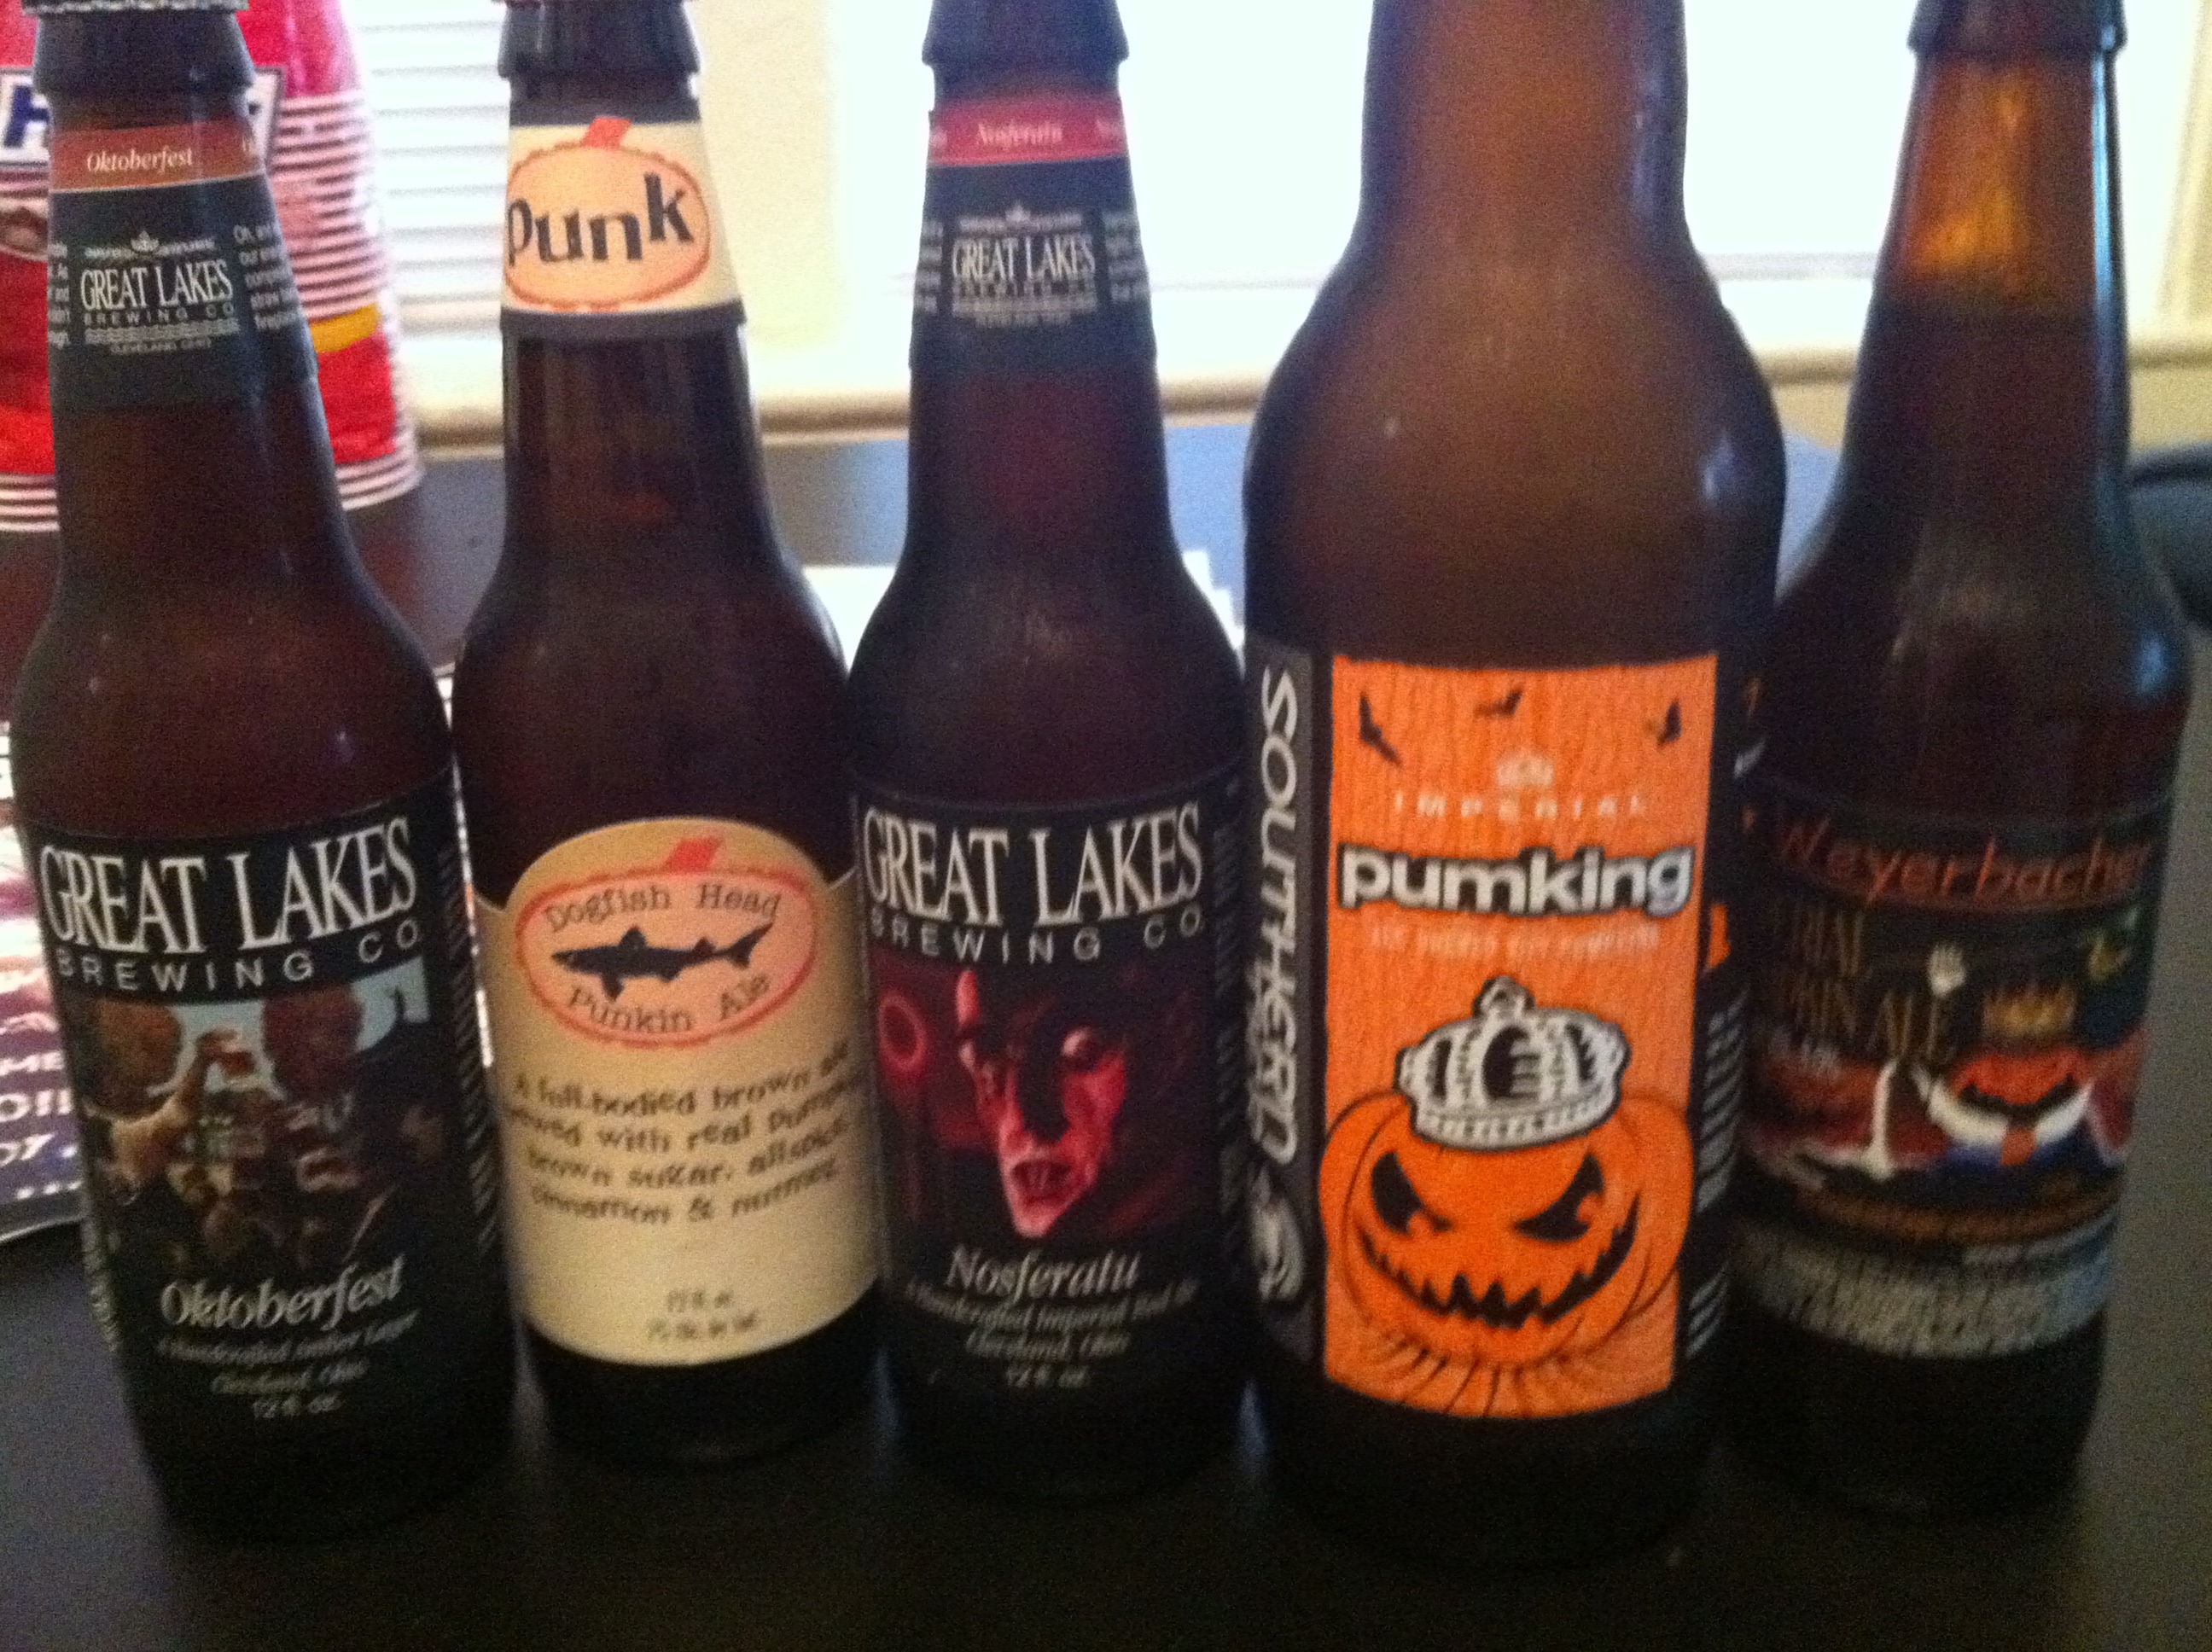 Dogfish+head+punkin+ale+clone+extract